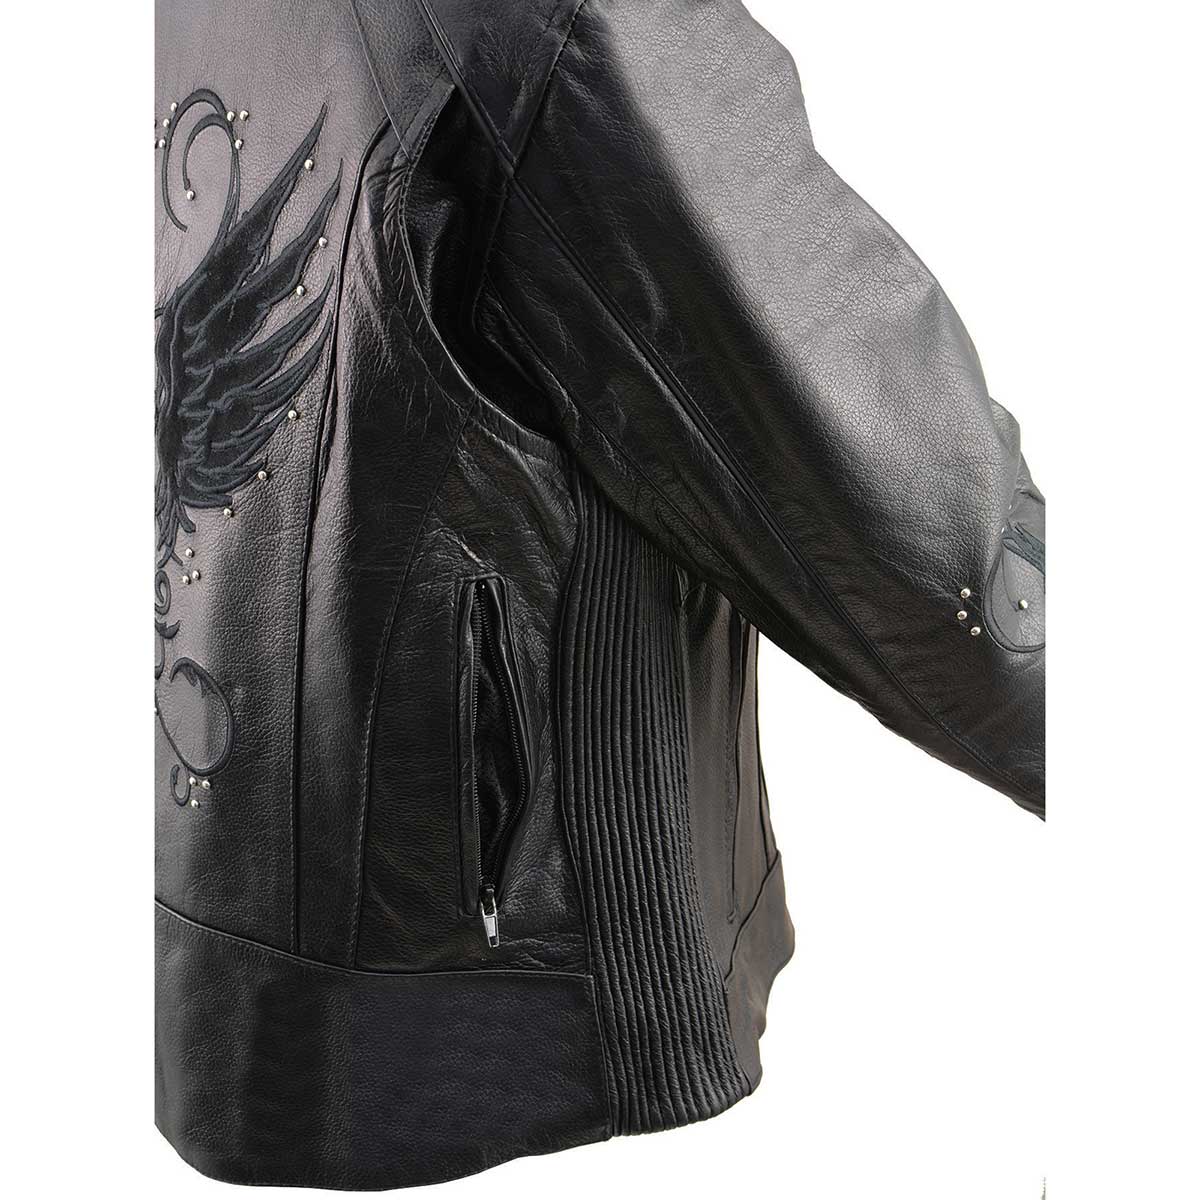 Milwaukee Leather X1952 Women's Embroidered Wing and Stud Design Black Leather Scooter Jacket